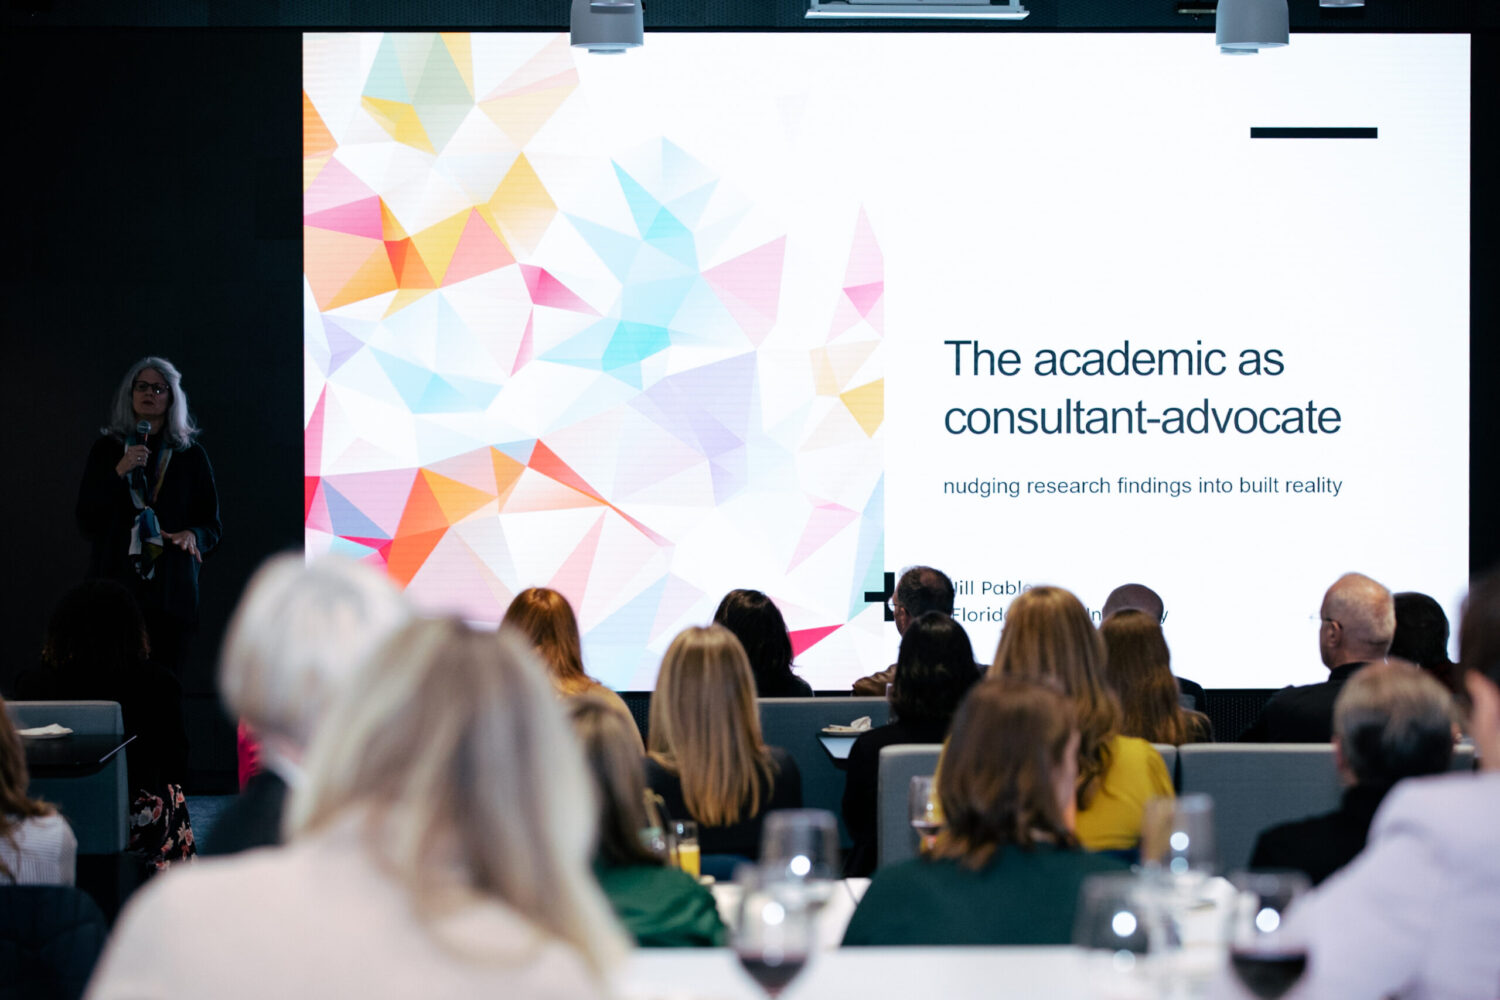 Woman giving presentation titled "The academic as consultant-advocate."